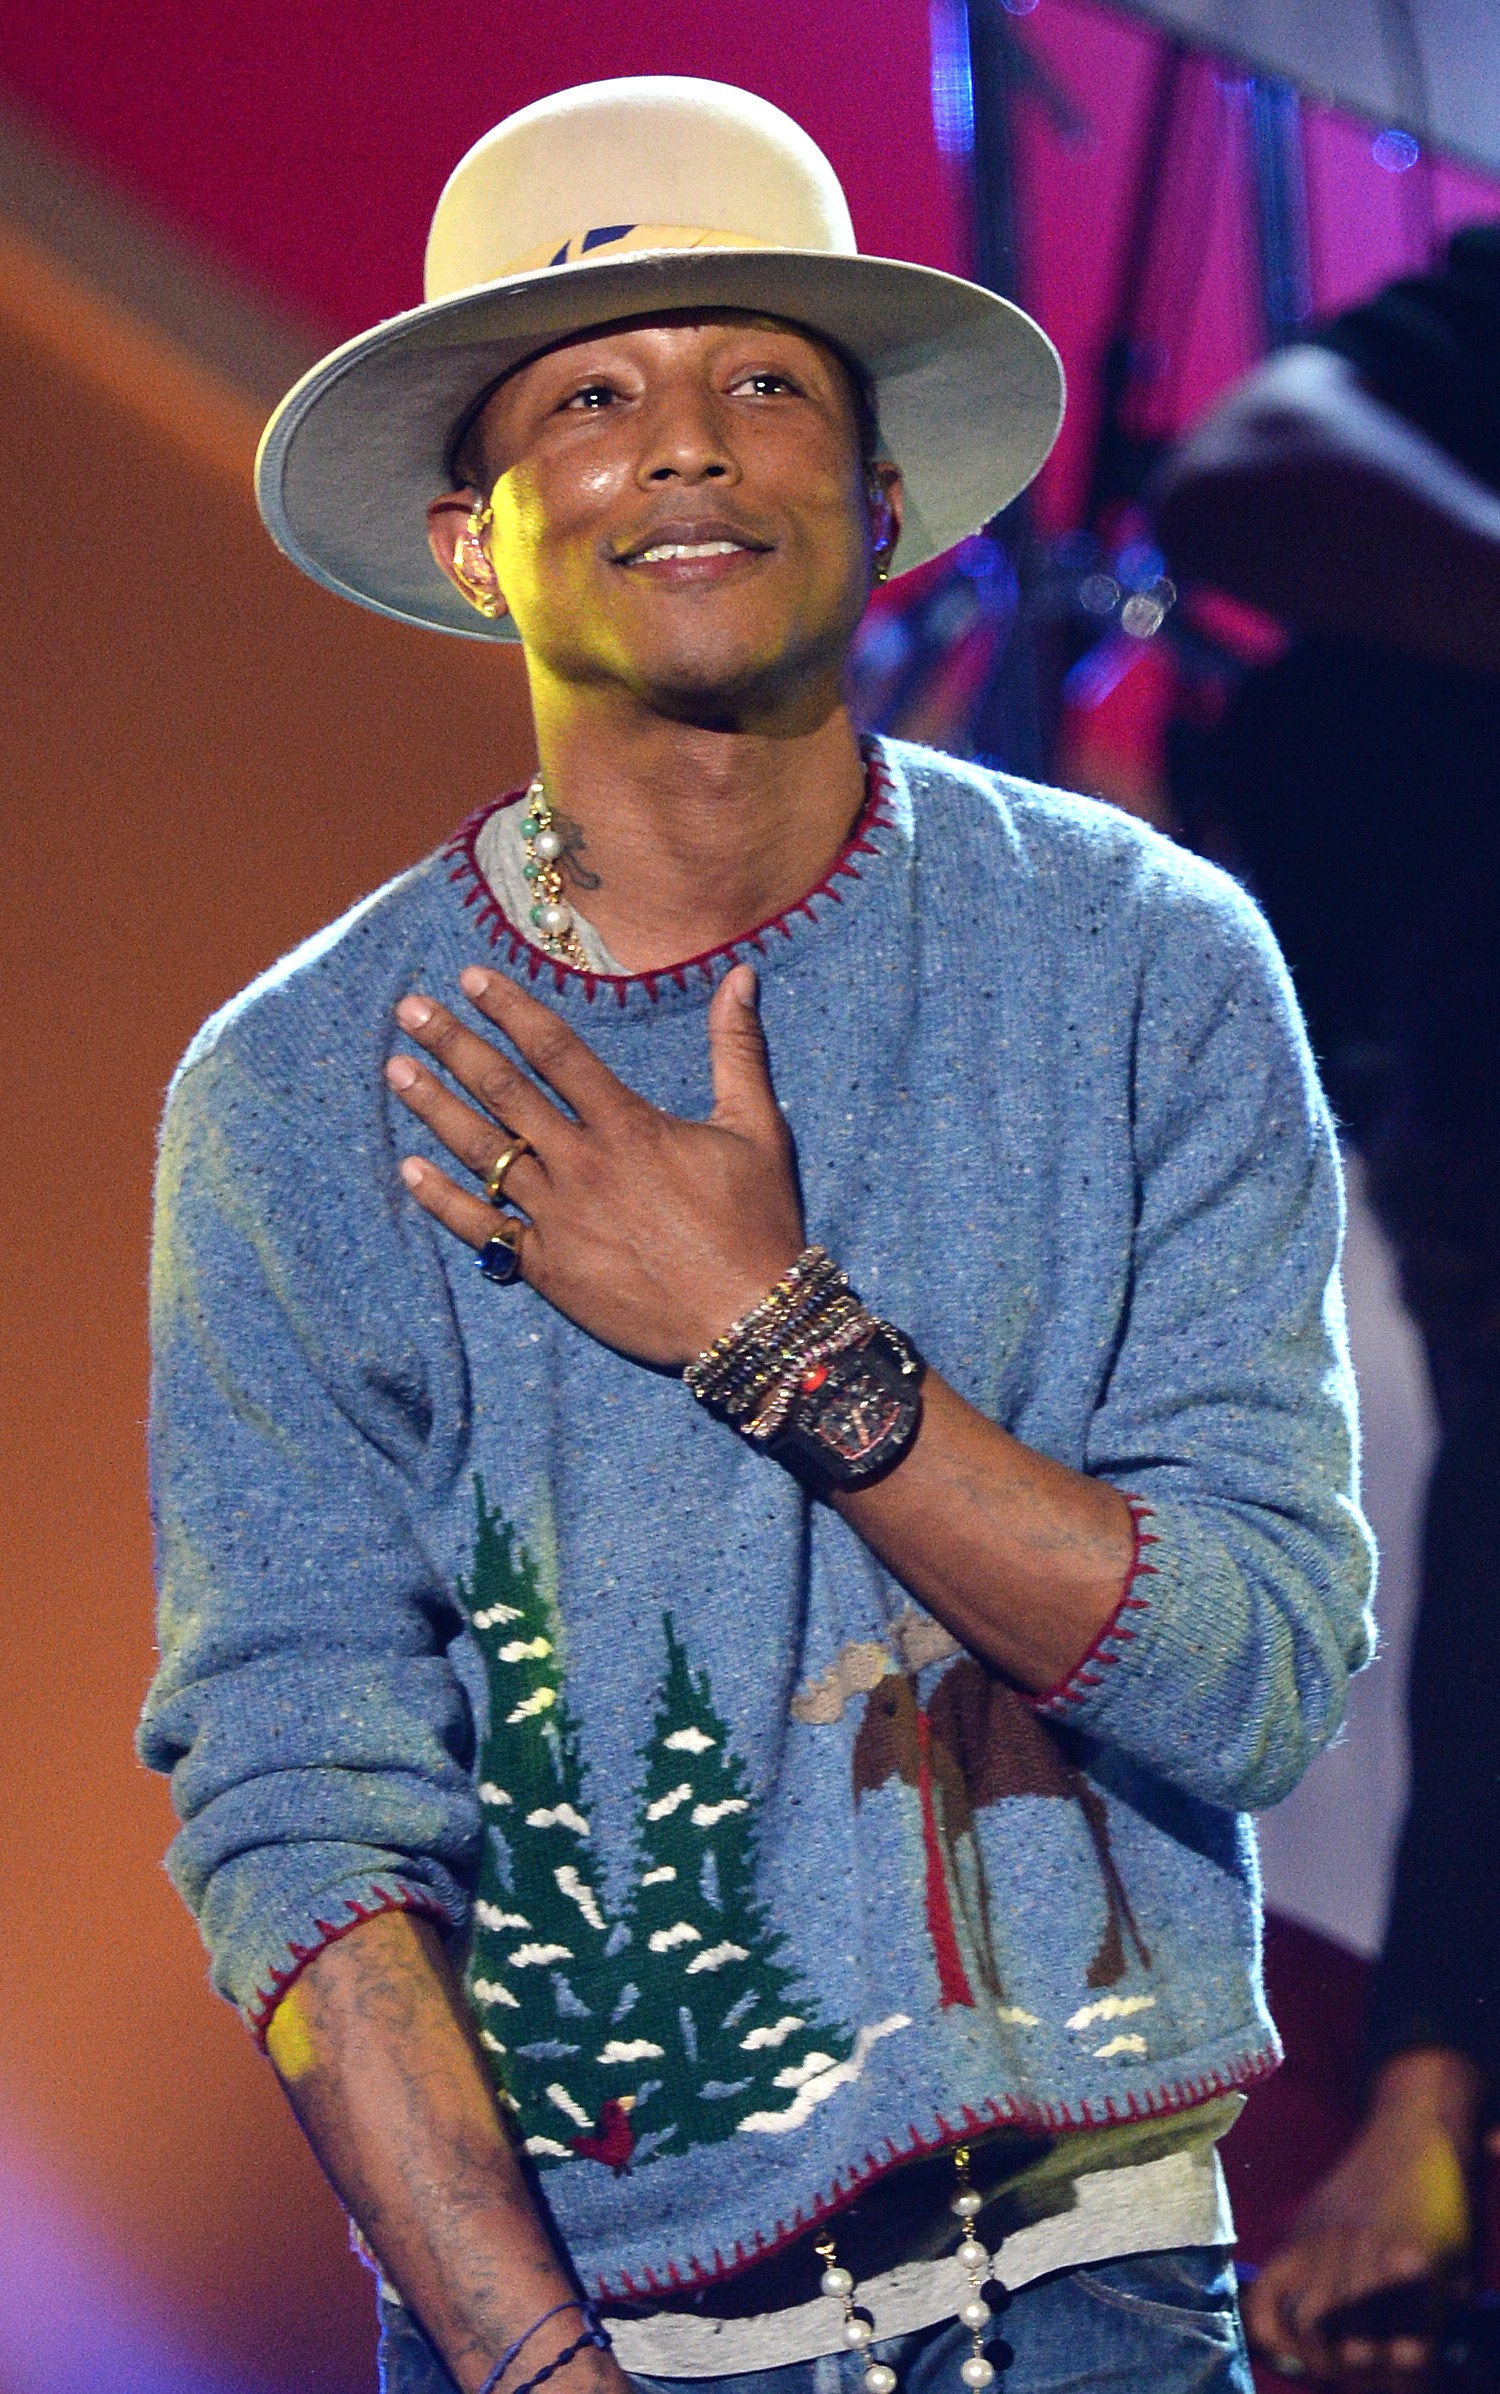 Singer Pharrell Williams performs at the taping of "A Very Grammy Christmas" at the Shrine Auditorium in Los Angeles, California on November 18, 2014. (Robyn Beck—AFP/Getty Images)